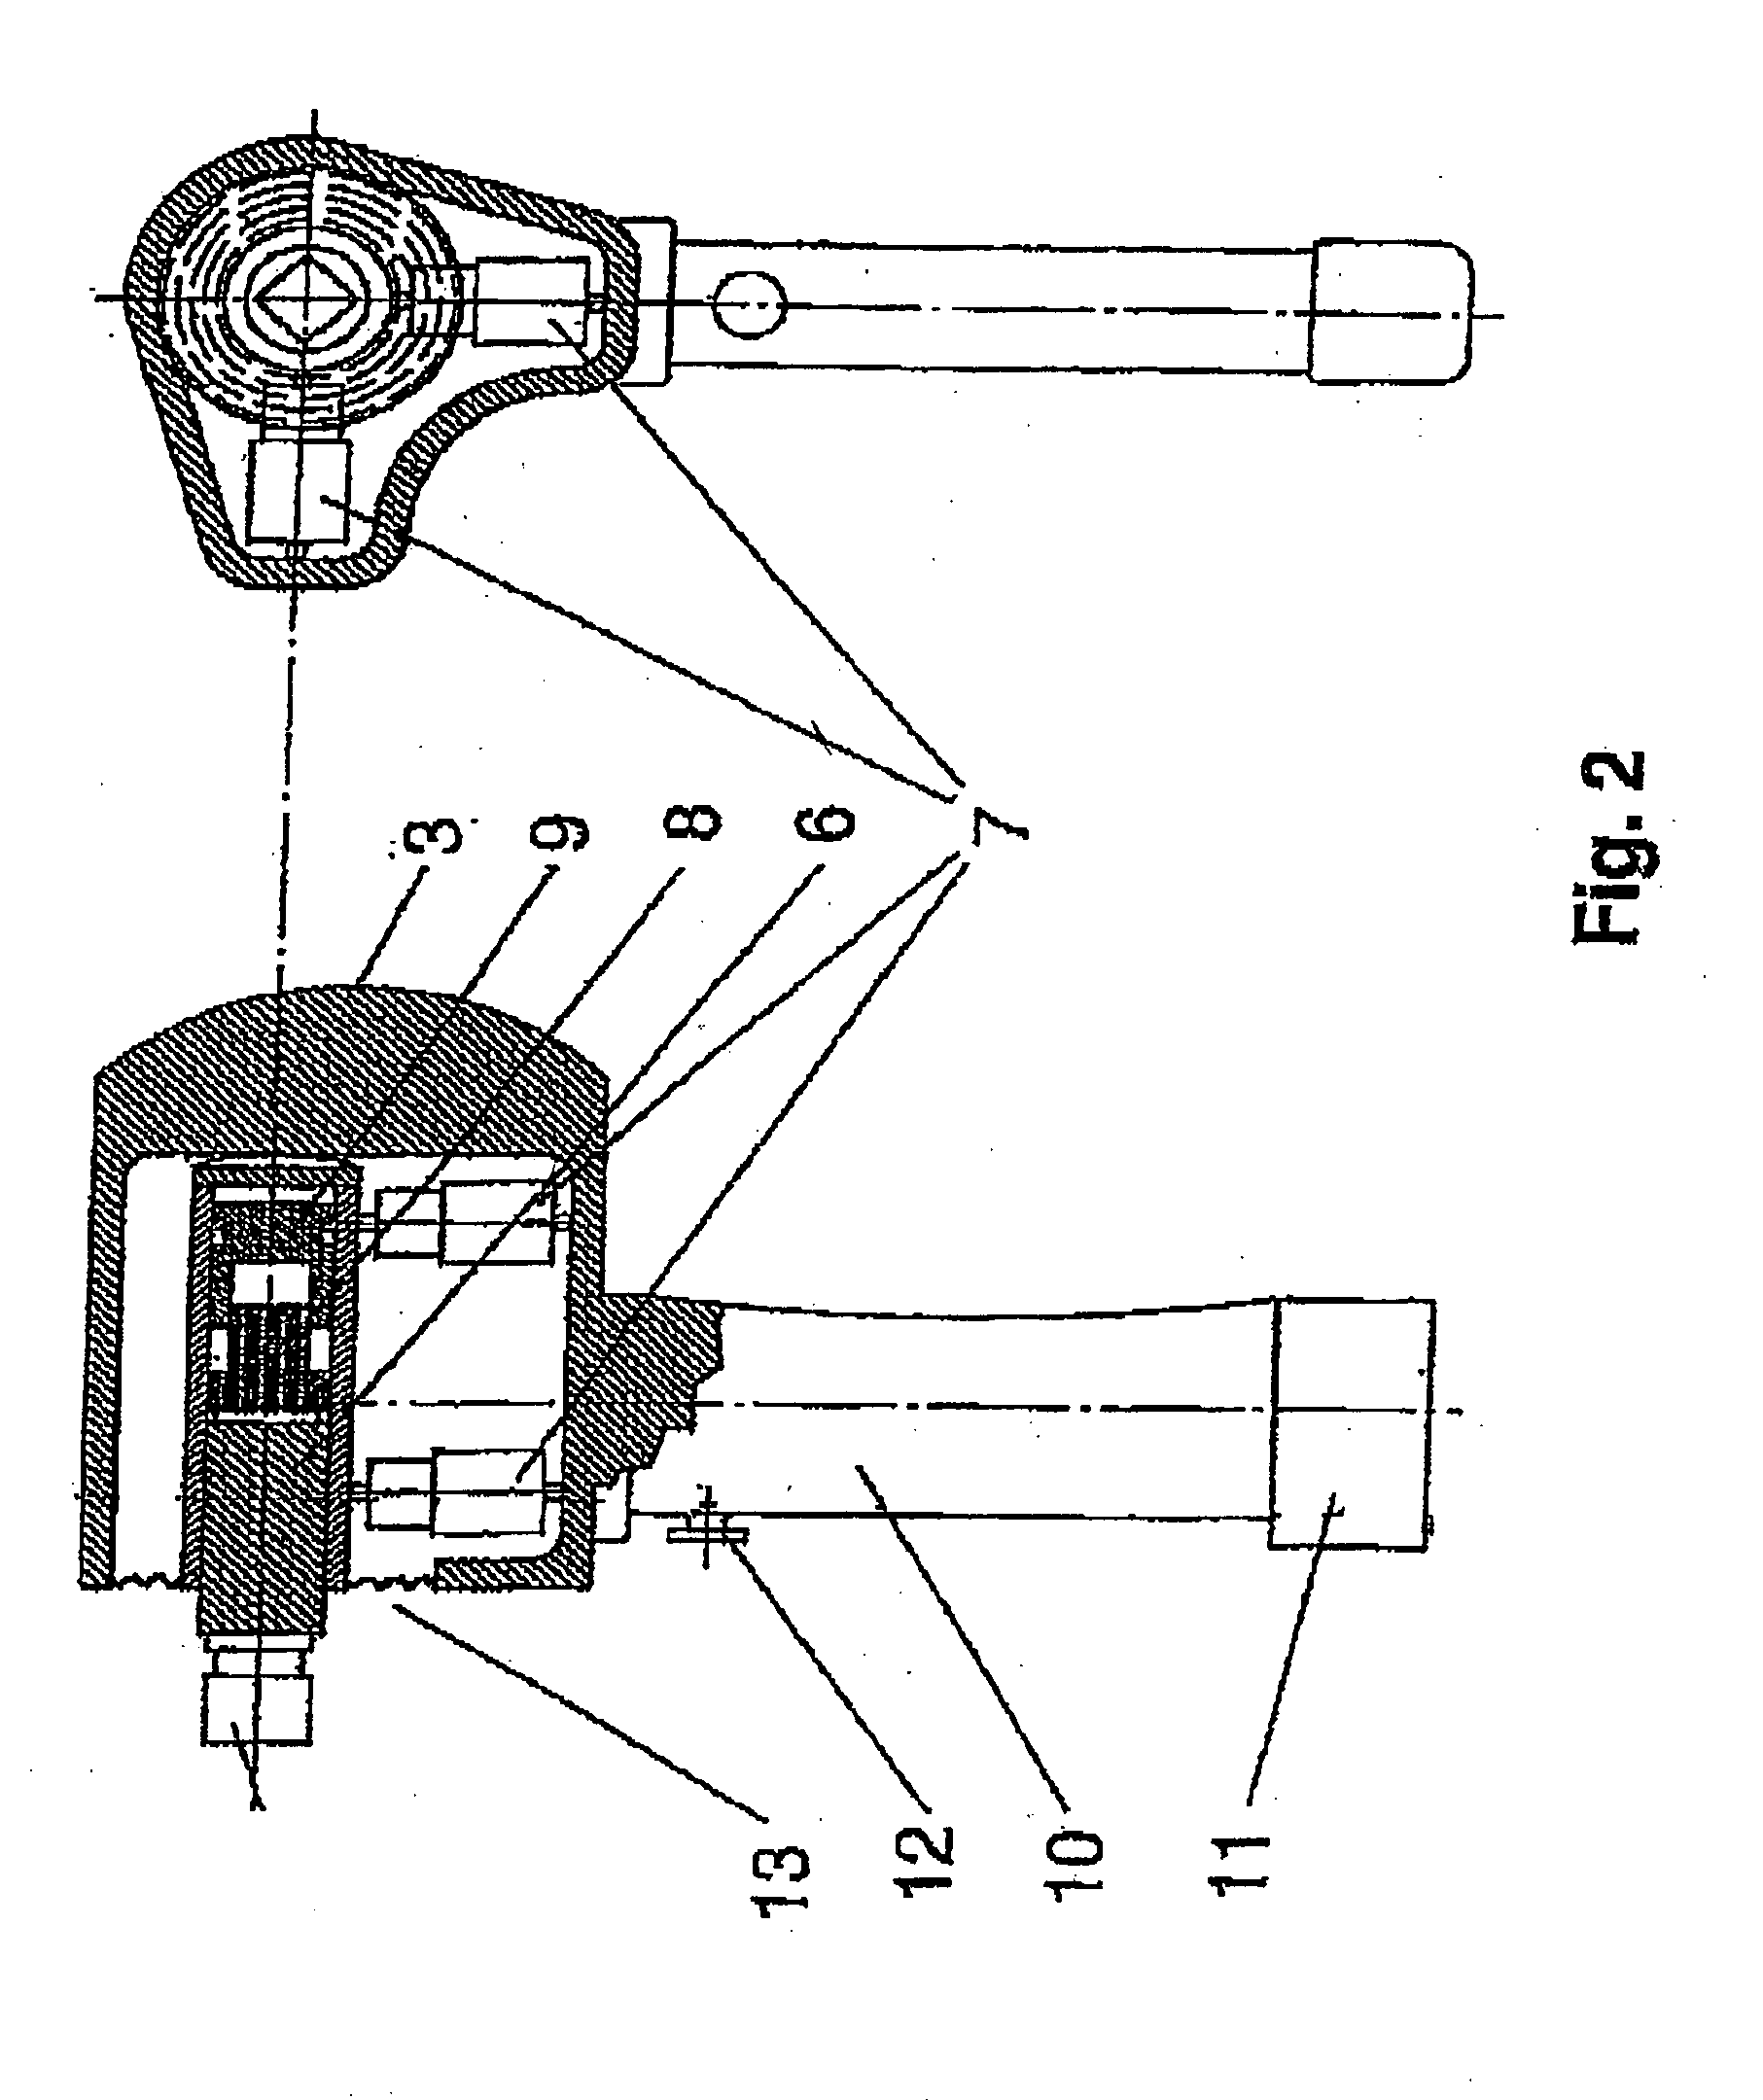 Device and method for treating parts of a human or animal body